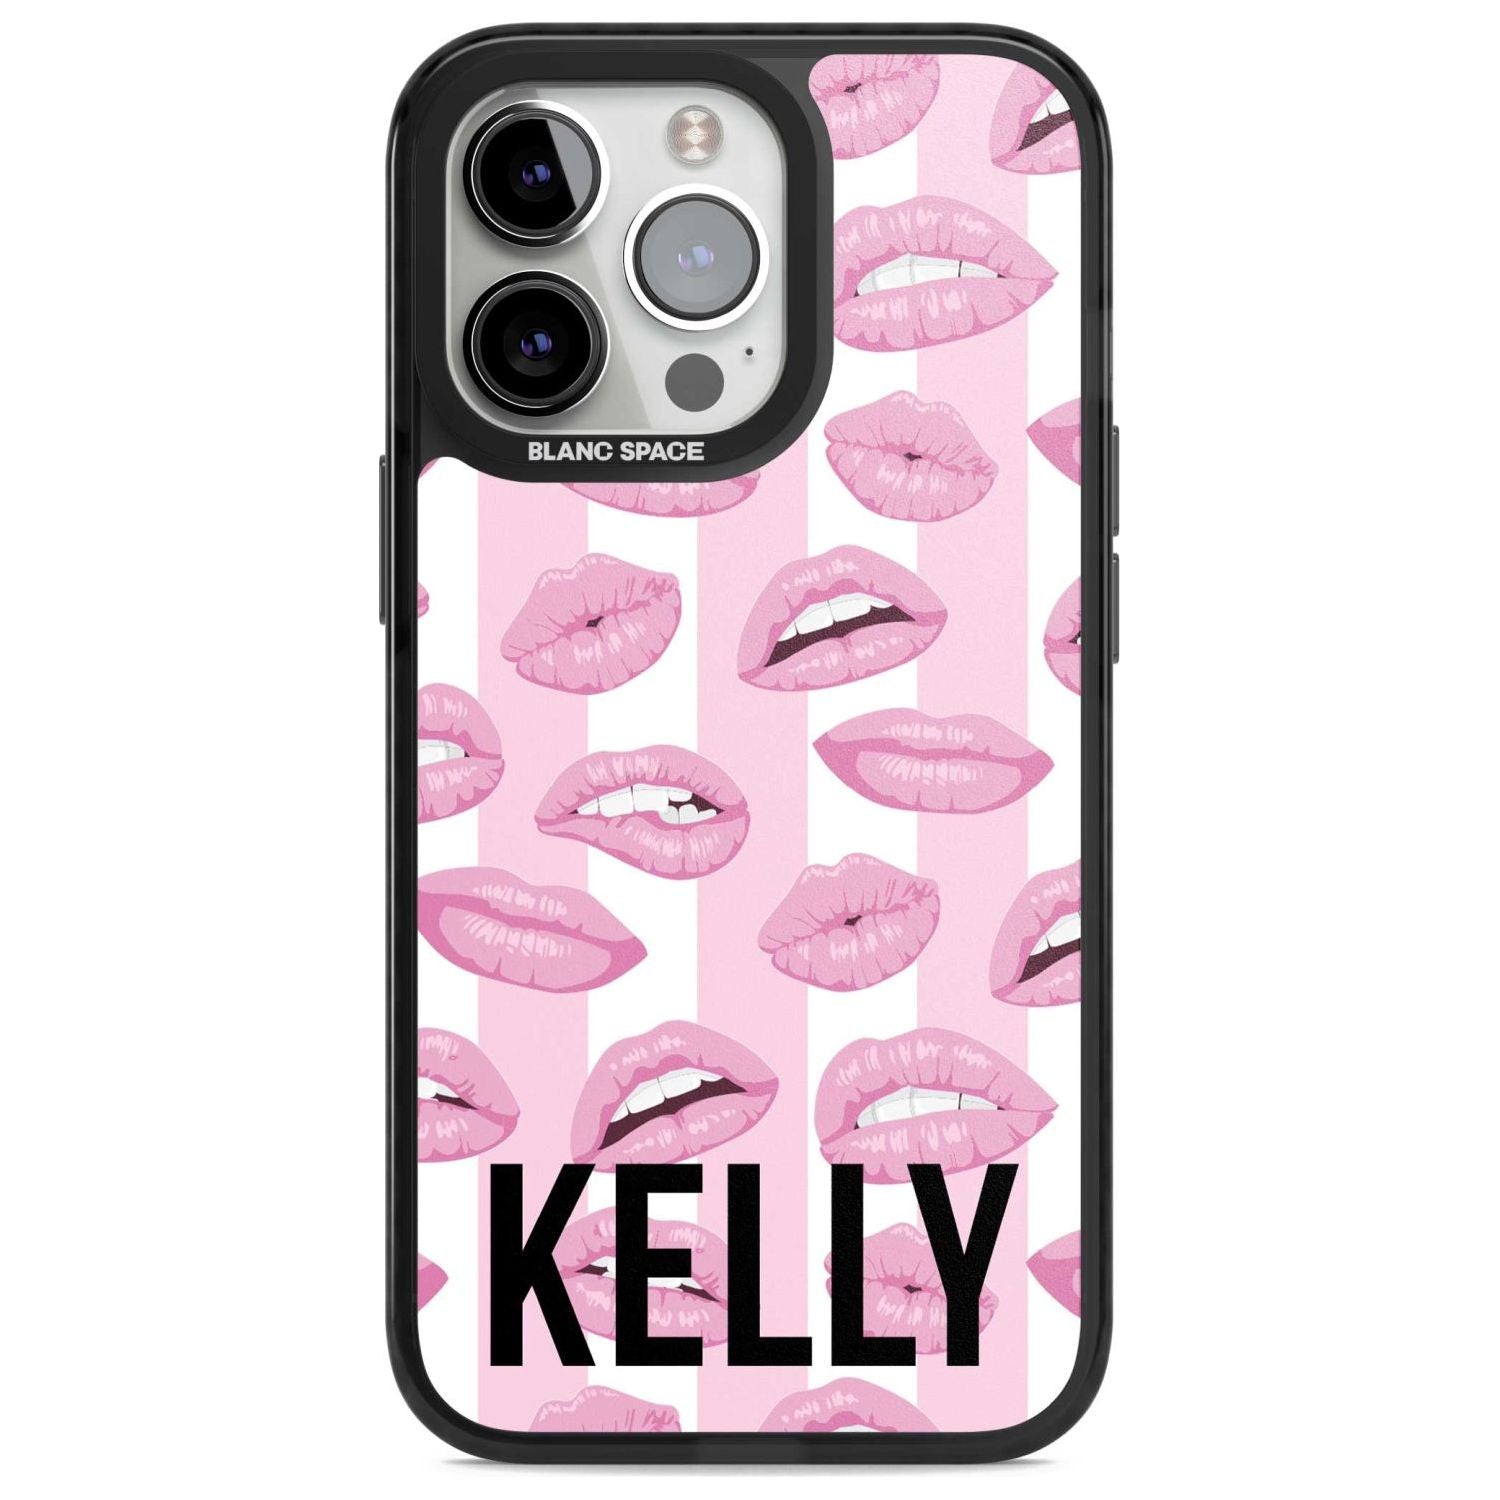 Personalised Pink Stripes & Lips Custom Phone Case iPhone 15 Pro Max / Magsafe Black Impact Case,iPhone 15 Pro / Magsafe Black Impact Case,iPhone 14 Pro Max / Magsafe Black Impact Case,iPhone 14 Pro / Magsafe Black Impact Case,iPhone 13 Pro / Magsafe Black Impact Case Blanc Space